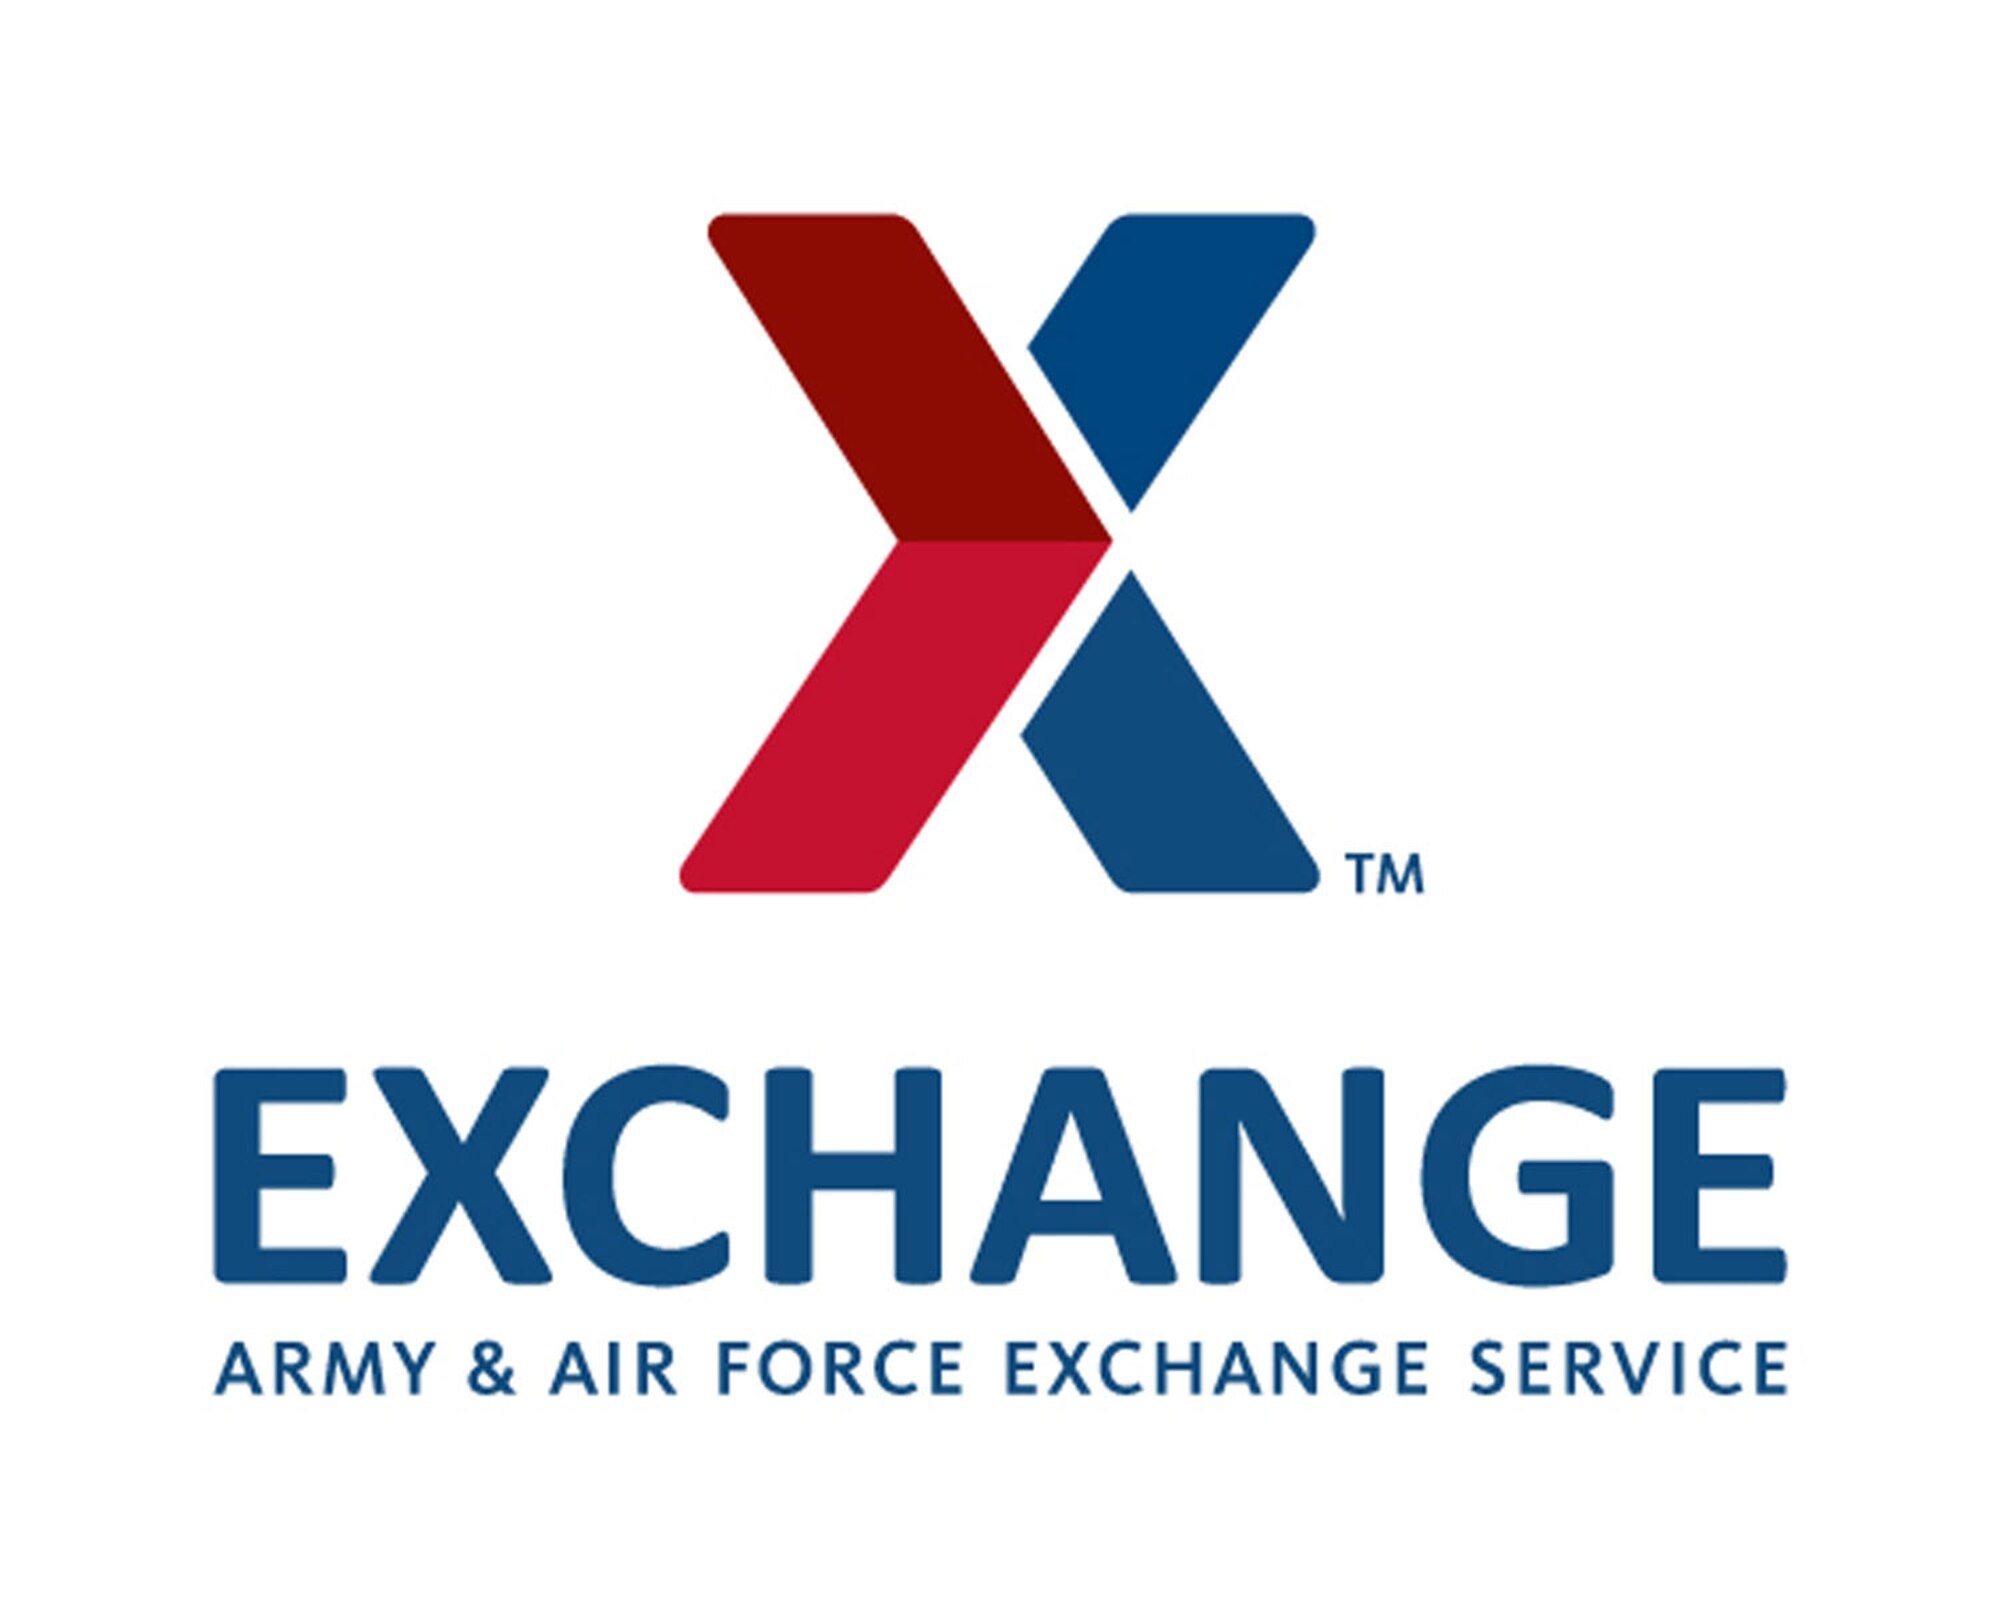 When the Army & Air Force Exchange Service unveiled its new brand on Sept. 17, it will ushered in a new era for exchange shoppers. 

The upgrade is happening everywhere the exchange has a presence, including shoppers' mailboxes and computers as the website changes to www.shopmyexchange.com and advertisements, tabloids and catalogs display a brand new 'X' logo. 

"The 'X' simplifies the many terms Army and Air Force Exchanges have been known as throughout the years," said Chief Master Sgt. Jeffry Helm, the Army & Air Force Exchange Service's senior enlisted advisor. "This endeavor marks the end of post exchange, base exchange, AAFES, 'AFEES,' PX and BX confusion. Now, the 'exchange' stands ready to meet all authorized shoppers' needs." 

"Even though there's a new look, customers around the world will still receive the same competitively-priced products and tax-free shopping they've come to expect from their exchange benefit," he said. "Regardless of the appearance, the benefit remains the same." 

(Courtesy of the Army & Air Force Exchange Service Public Affairs)